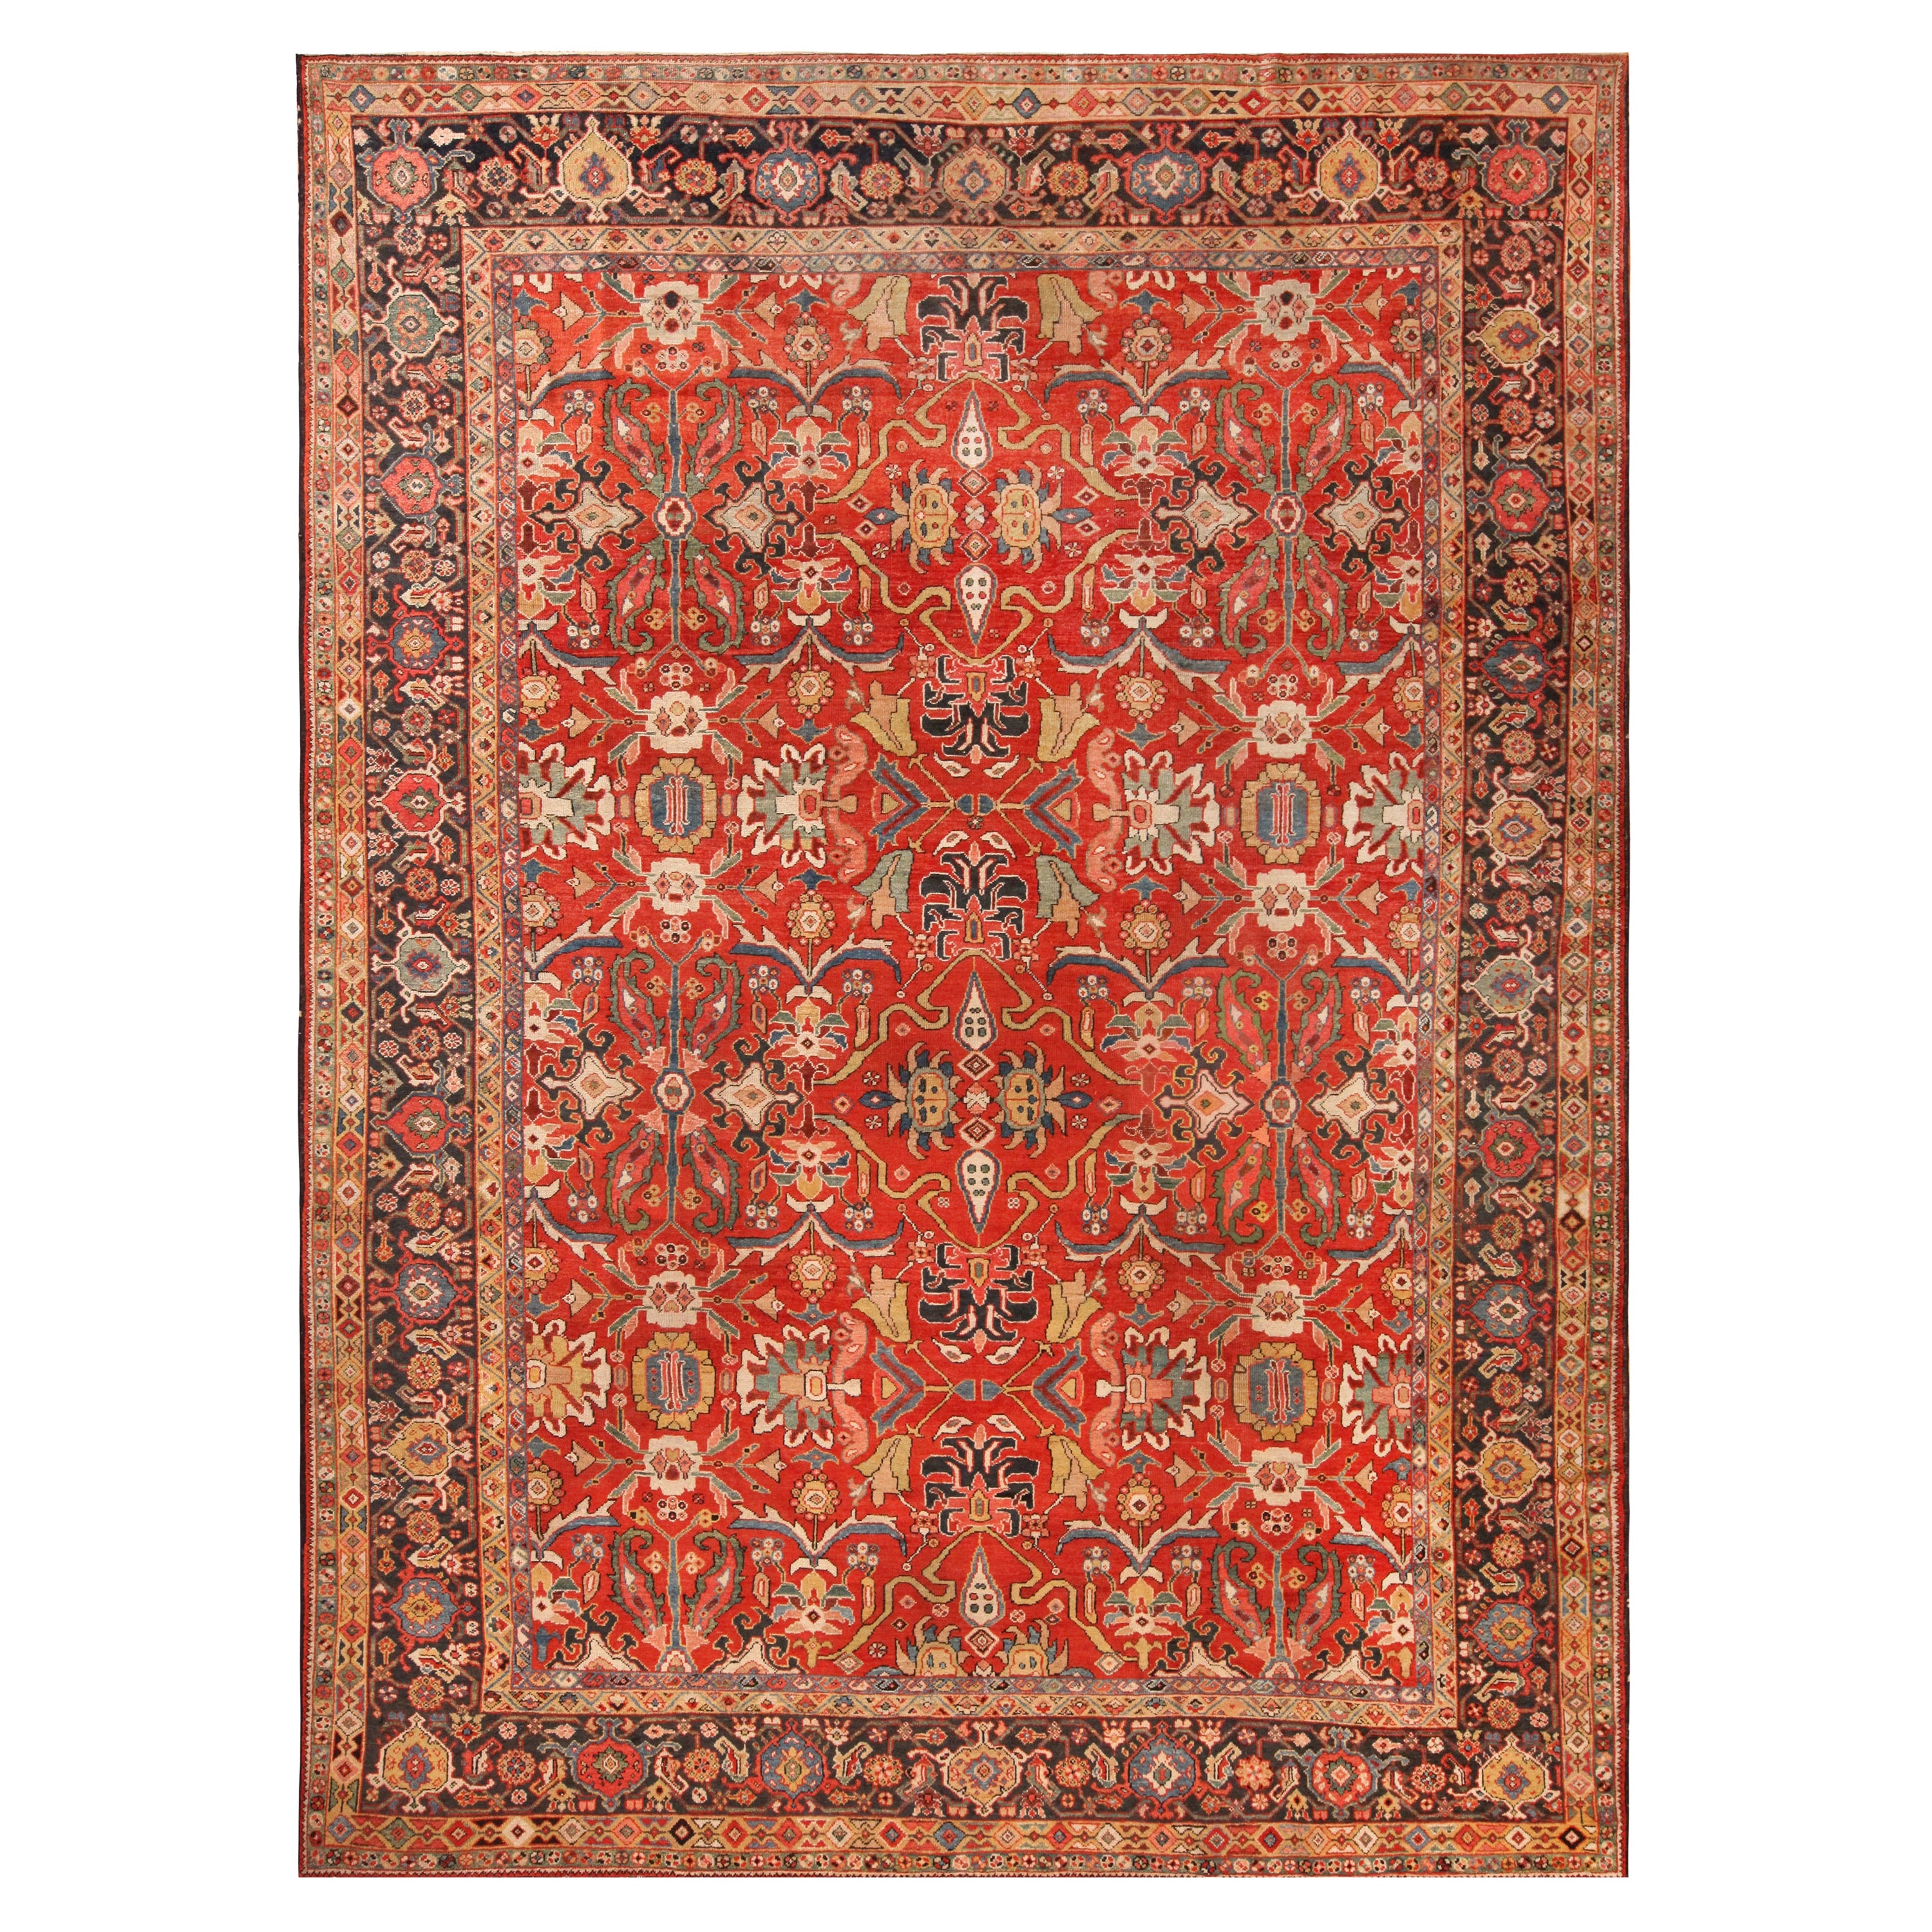 Nazmiyal Collection Red Antique Persian Sultanabad Rug. 10 ft x 14 ft